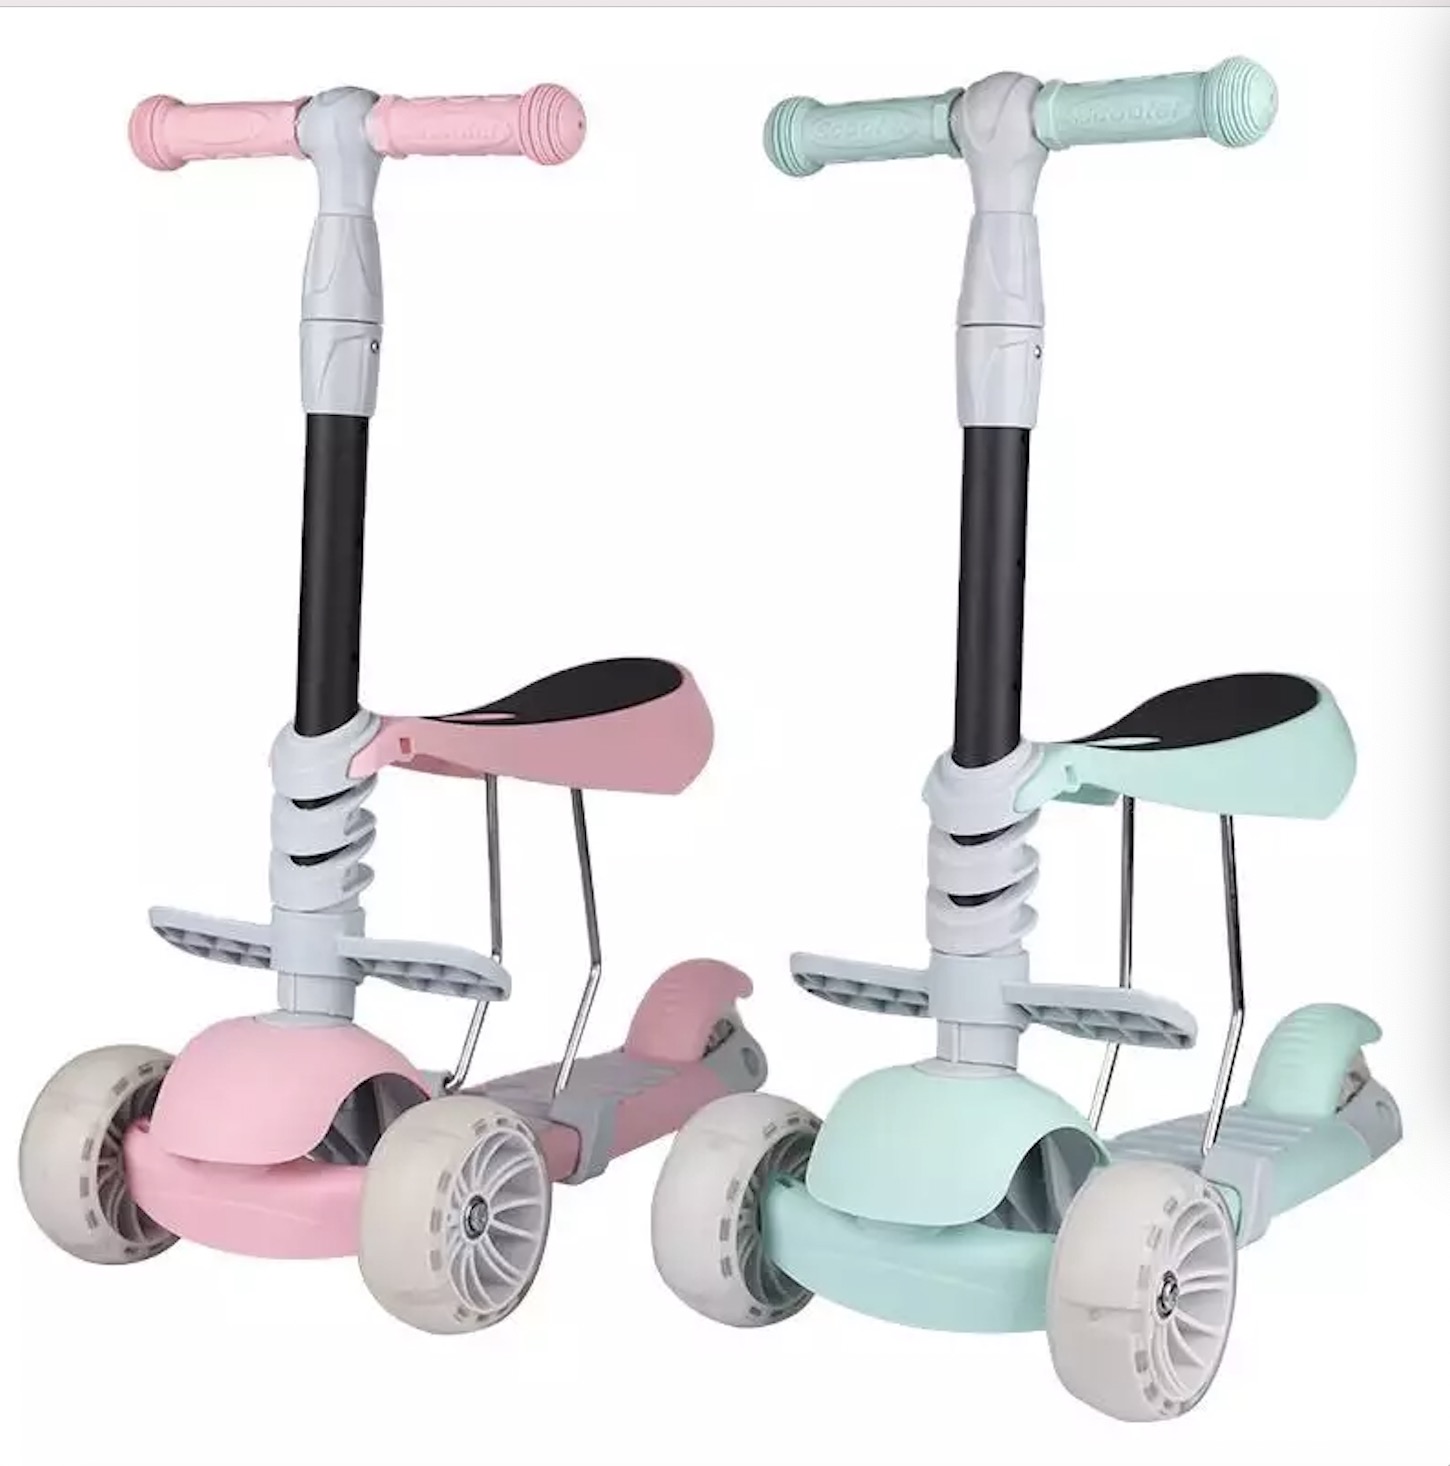 3 In 1 Kids Opklapbare Scooter Cycle Balance Bike Berneboartersguod 3 In 1 Kids Scooter 3 Wheel With Seat Kids Scooter